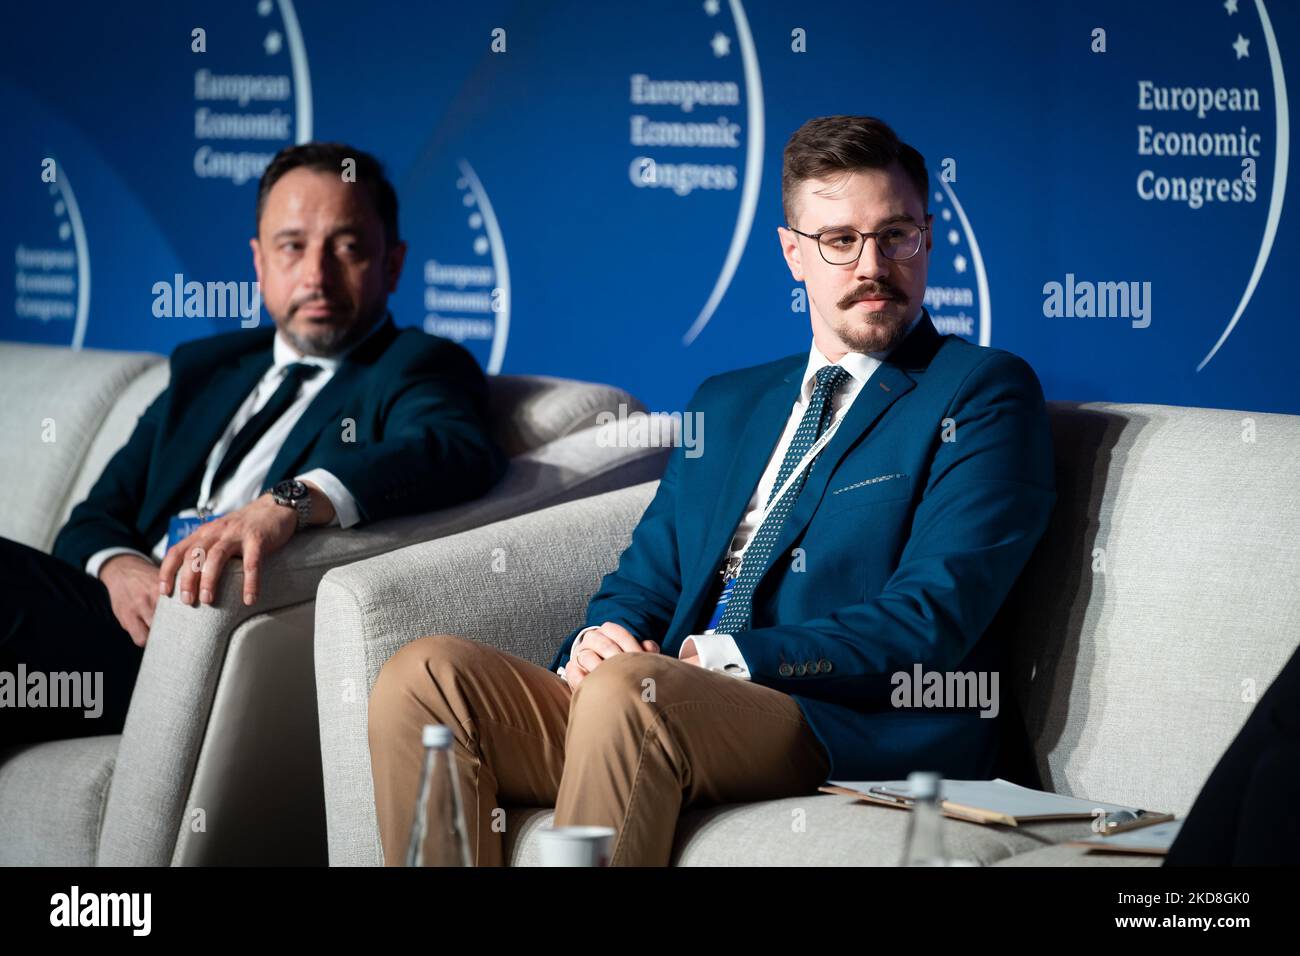 Sebastian Perczak (Managing Director, Commercial Bank Country Head, Citi),  Mateusz Piotrowski (US Internal and Foreign Policy Analyst) during the  European Economic Congress in Katowice, Poland on April 26, 2022 (Photo by  Mateusz